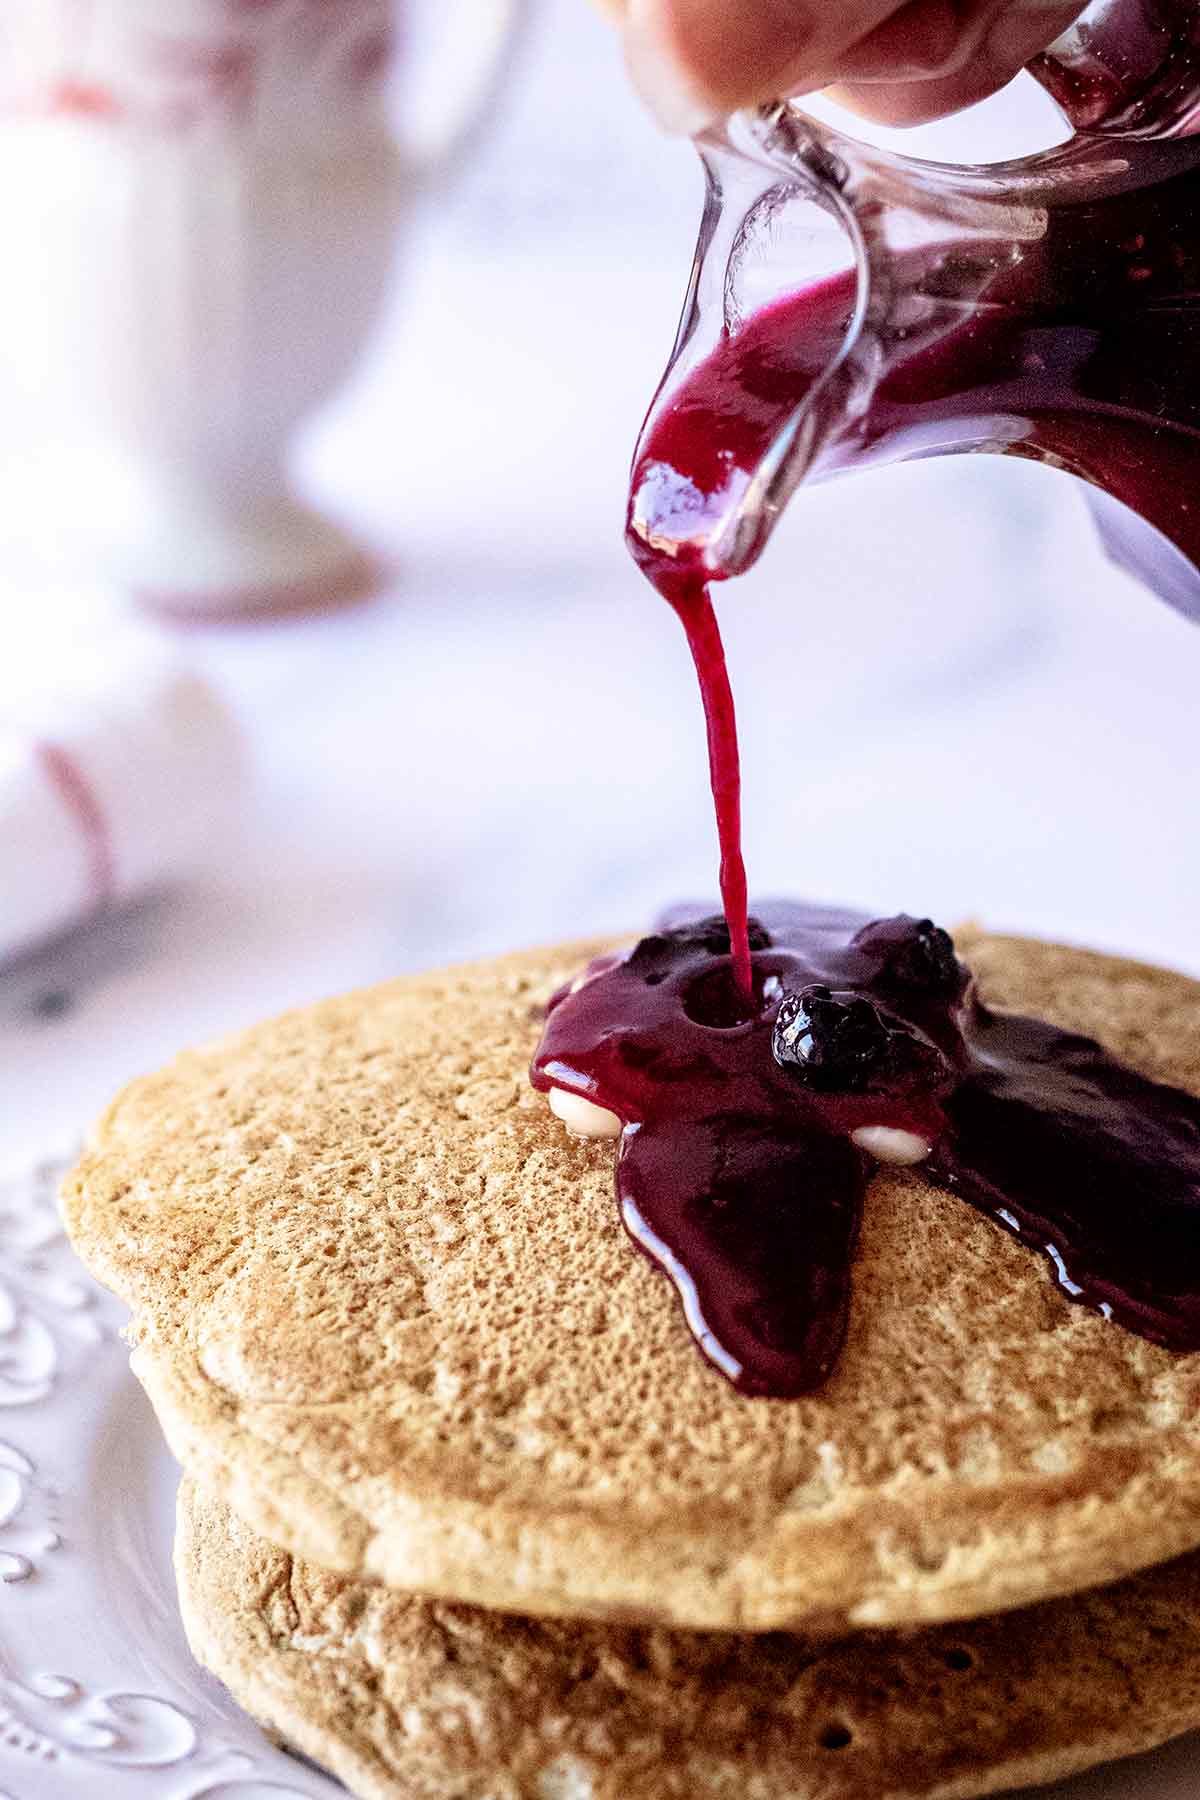 Syrup being poured over pancakes